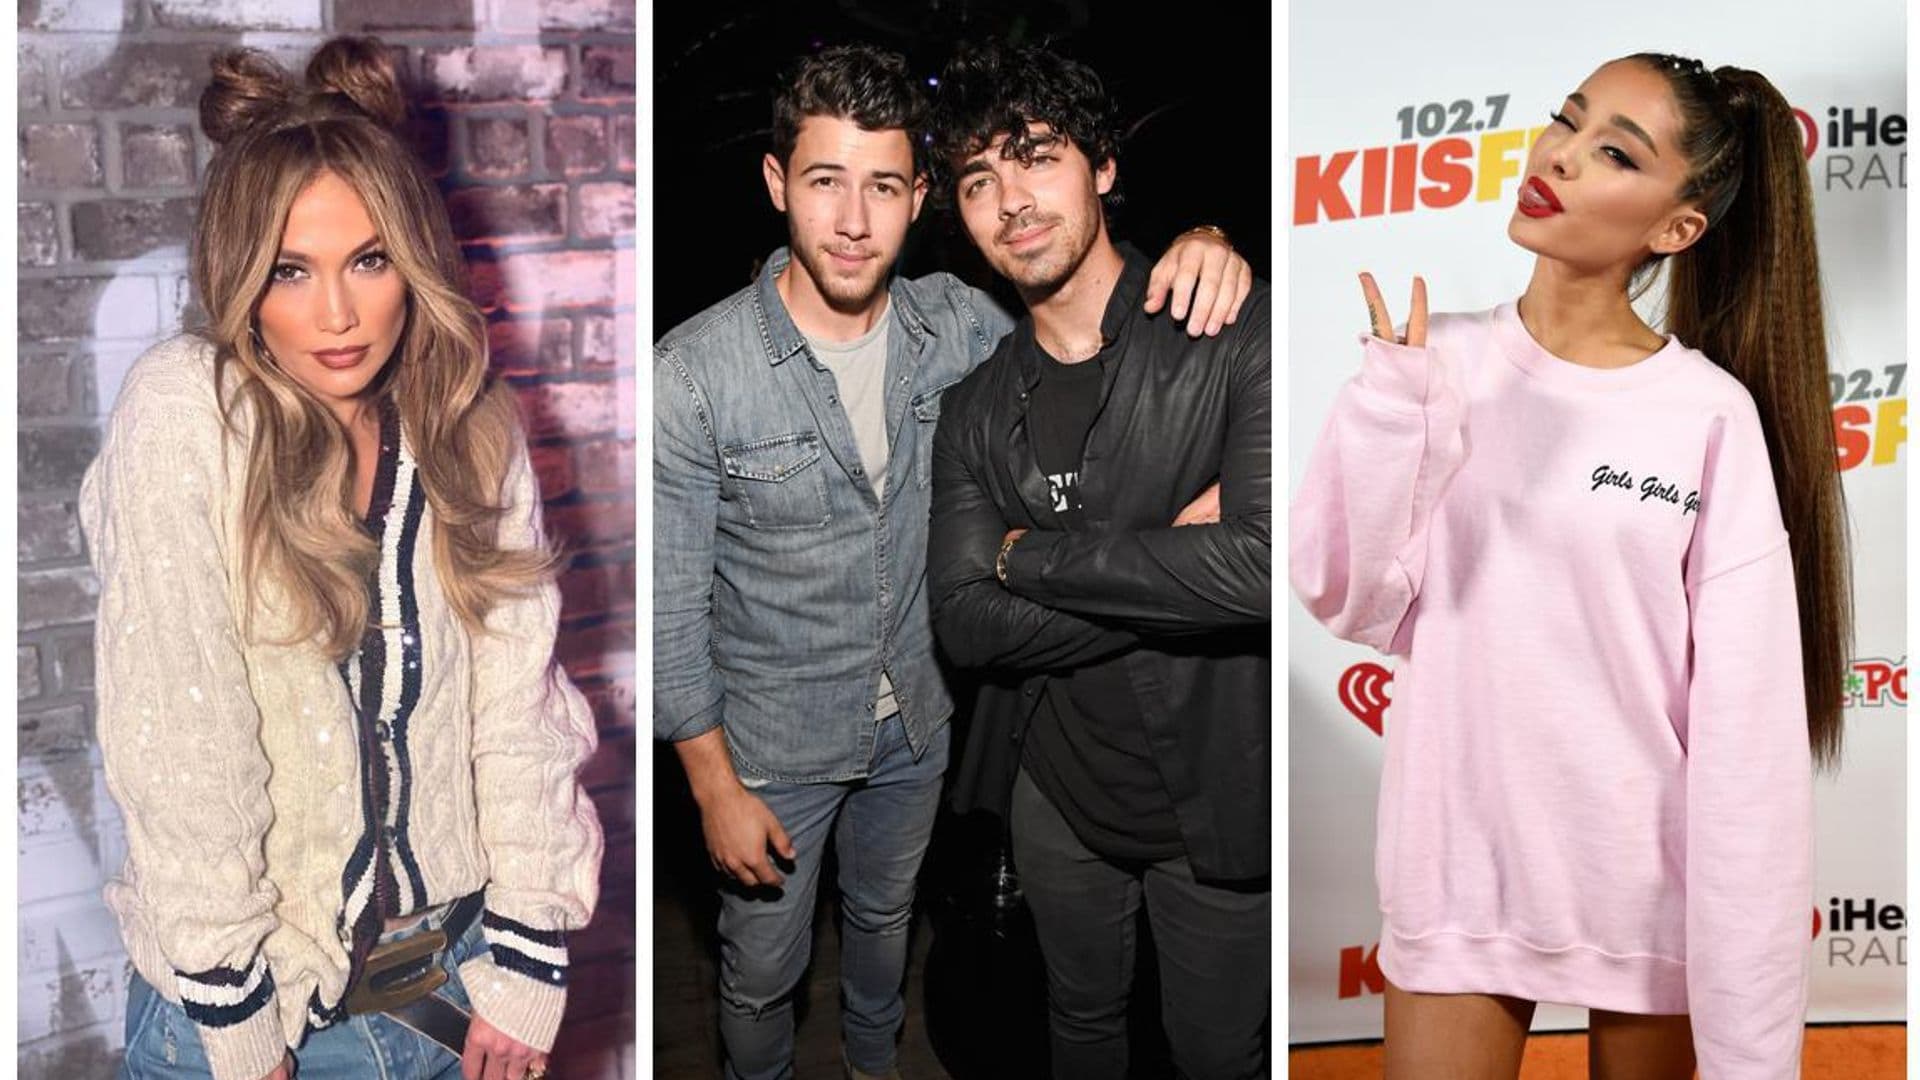 From JLo to the Jonas Brothers, here are the top shows you need to be streaming on Quibi